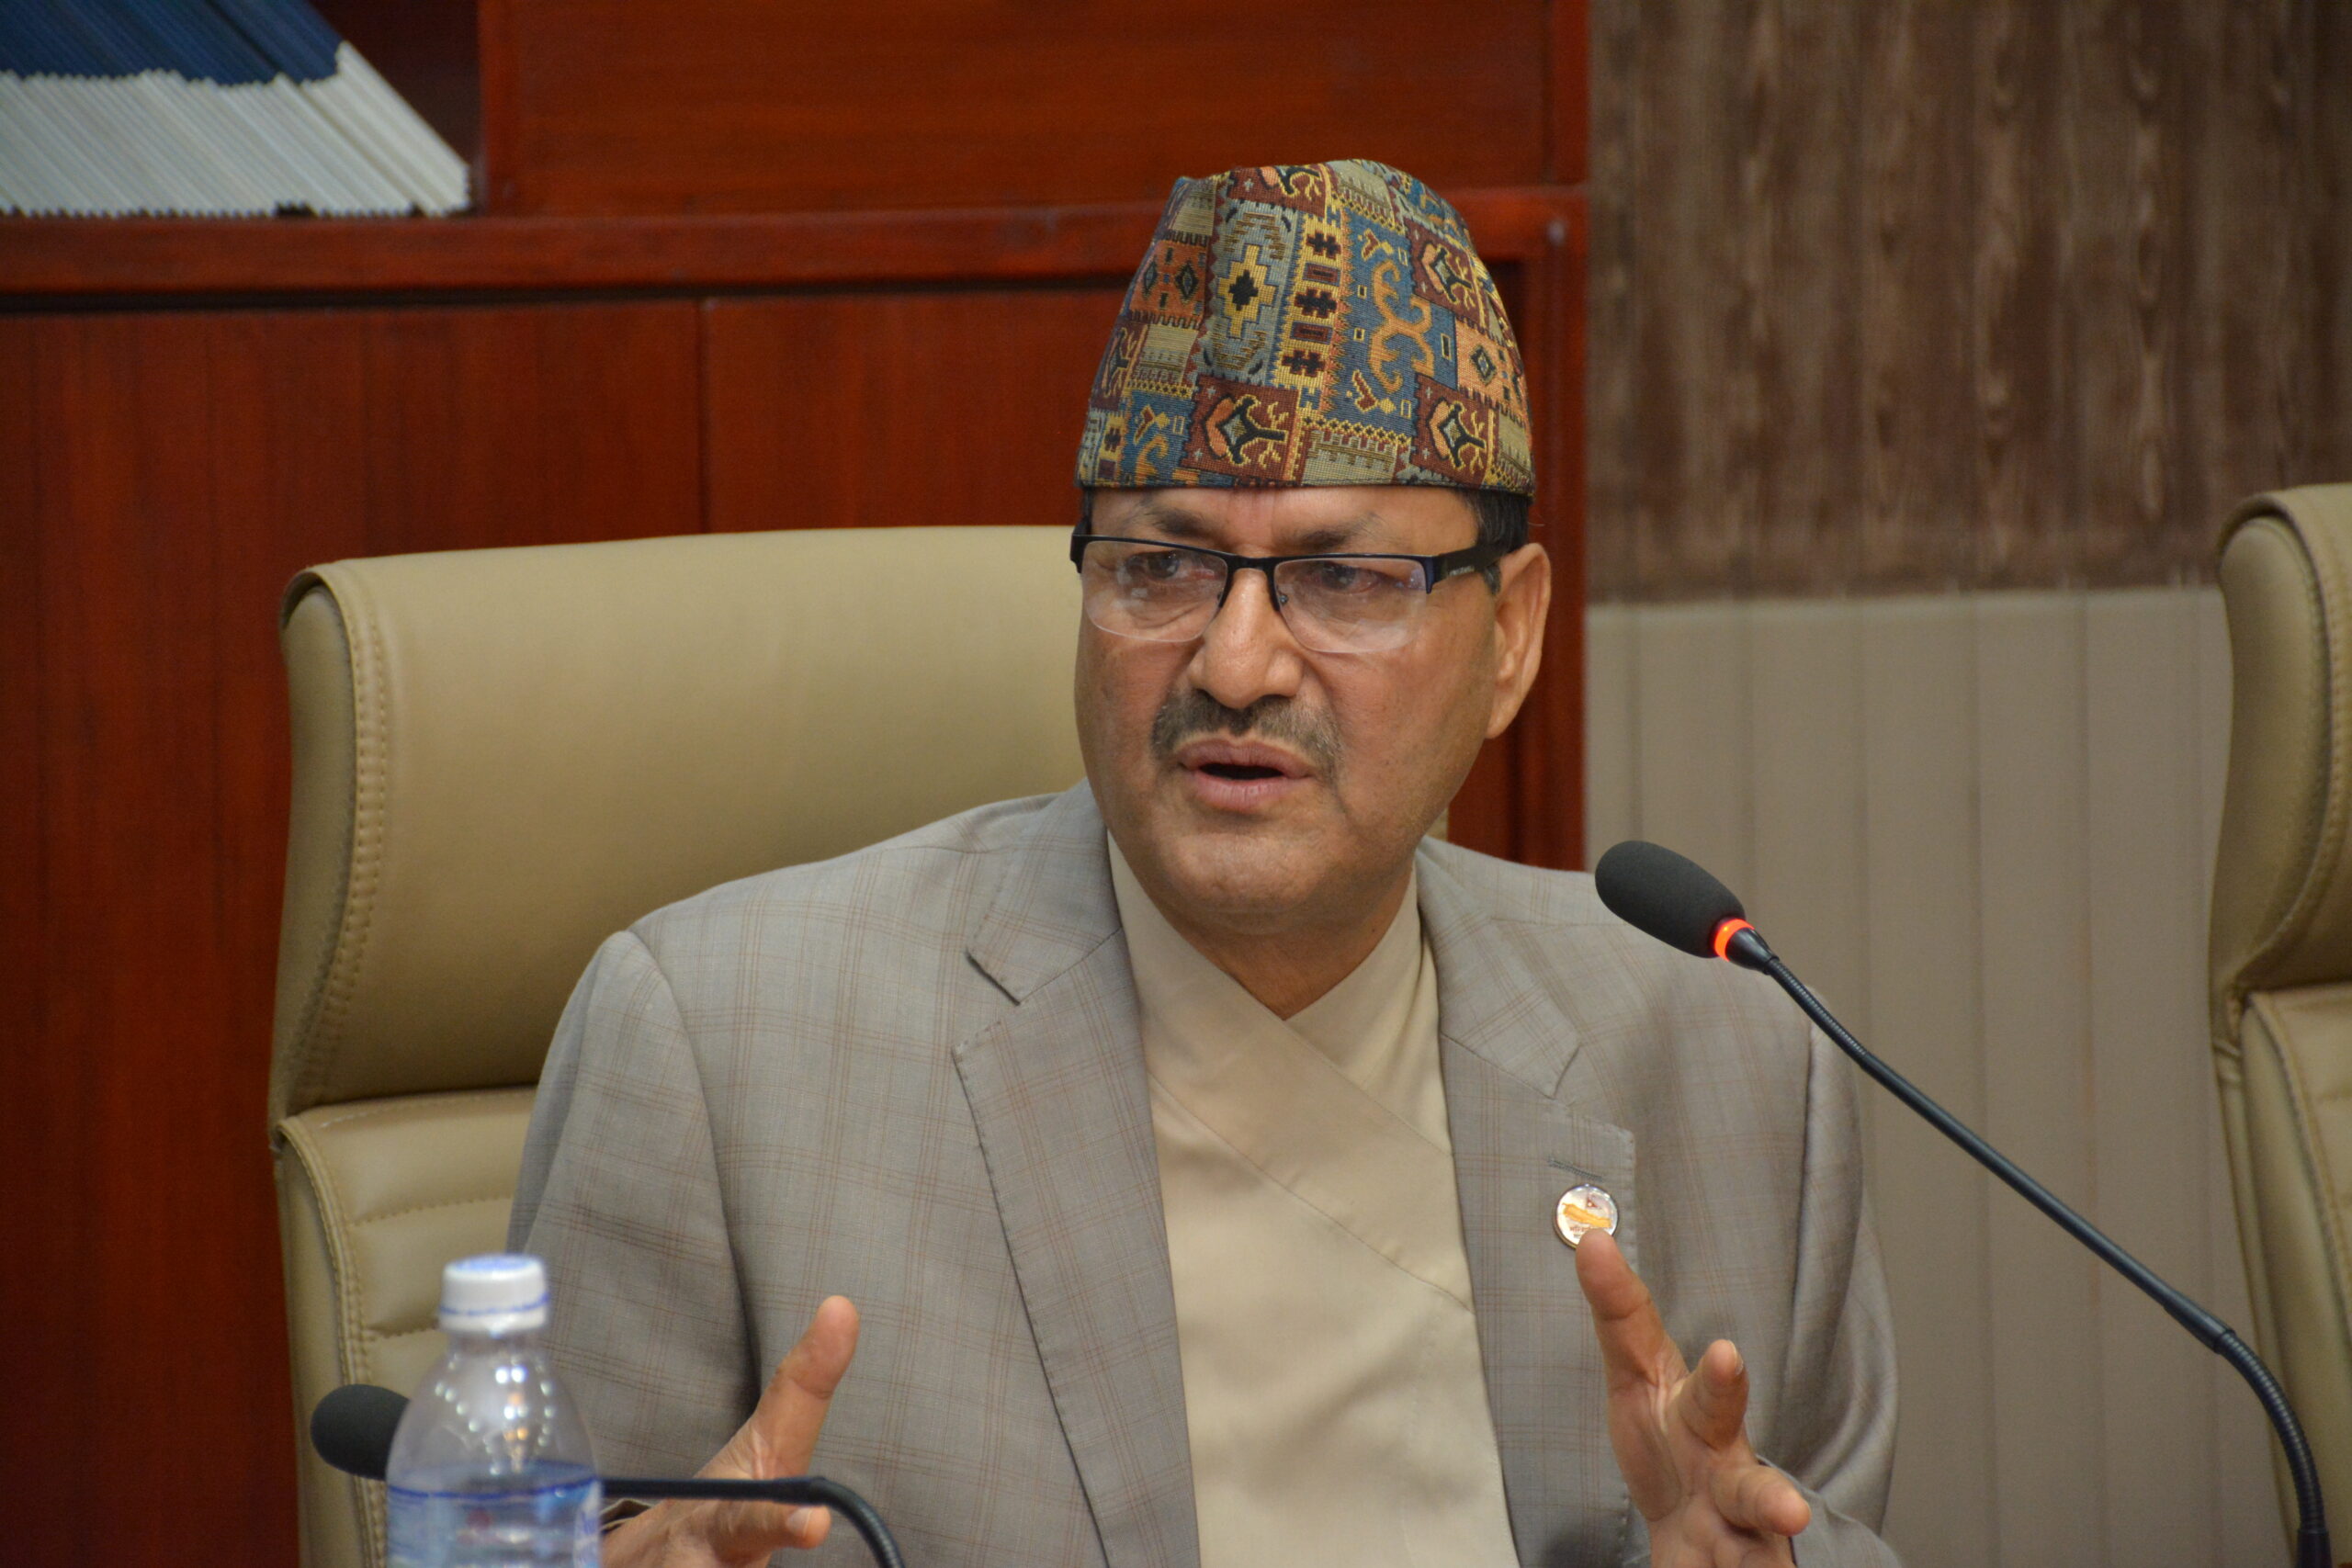 Efforts ongoing to address concerns of Nepali diaspora: Foreign Minister Saud